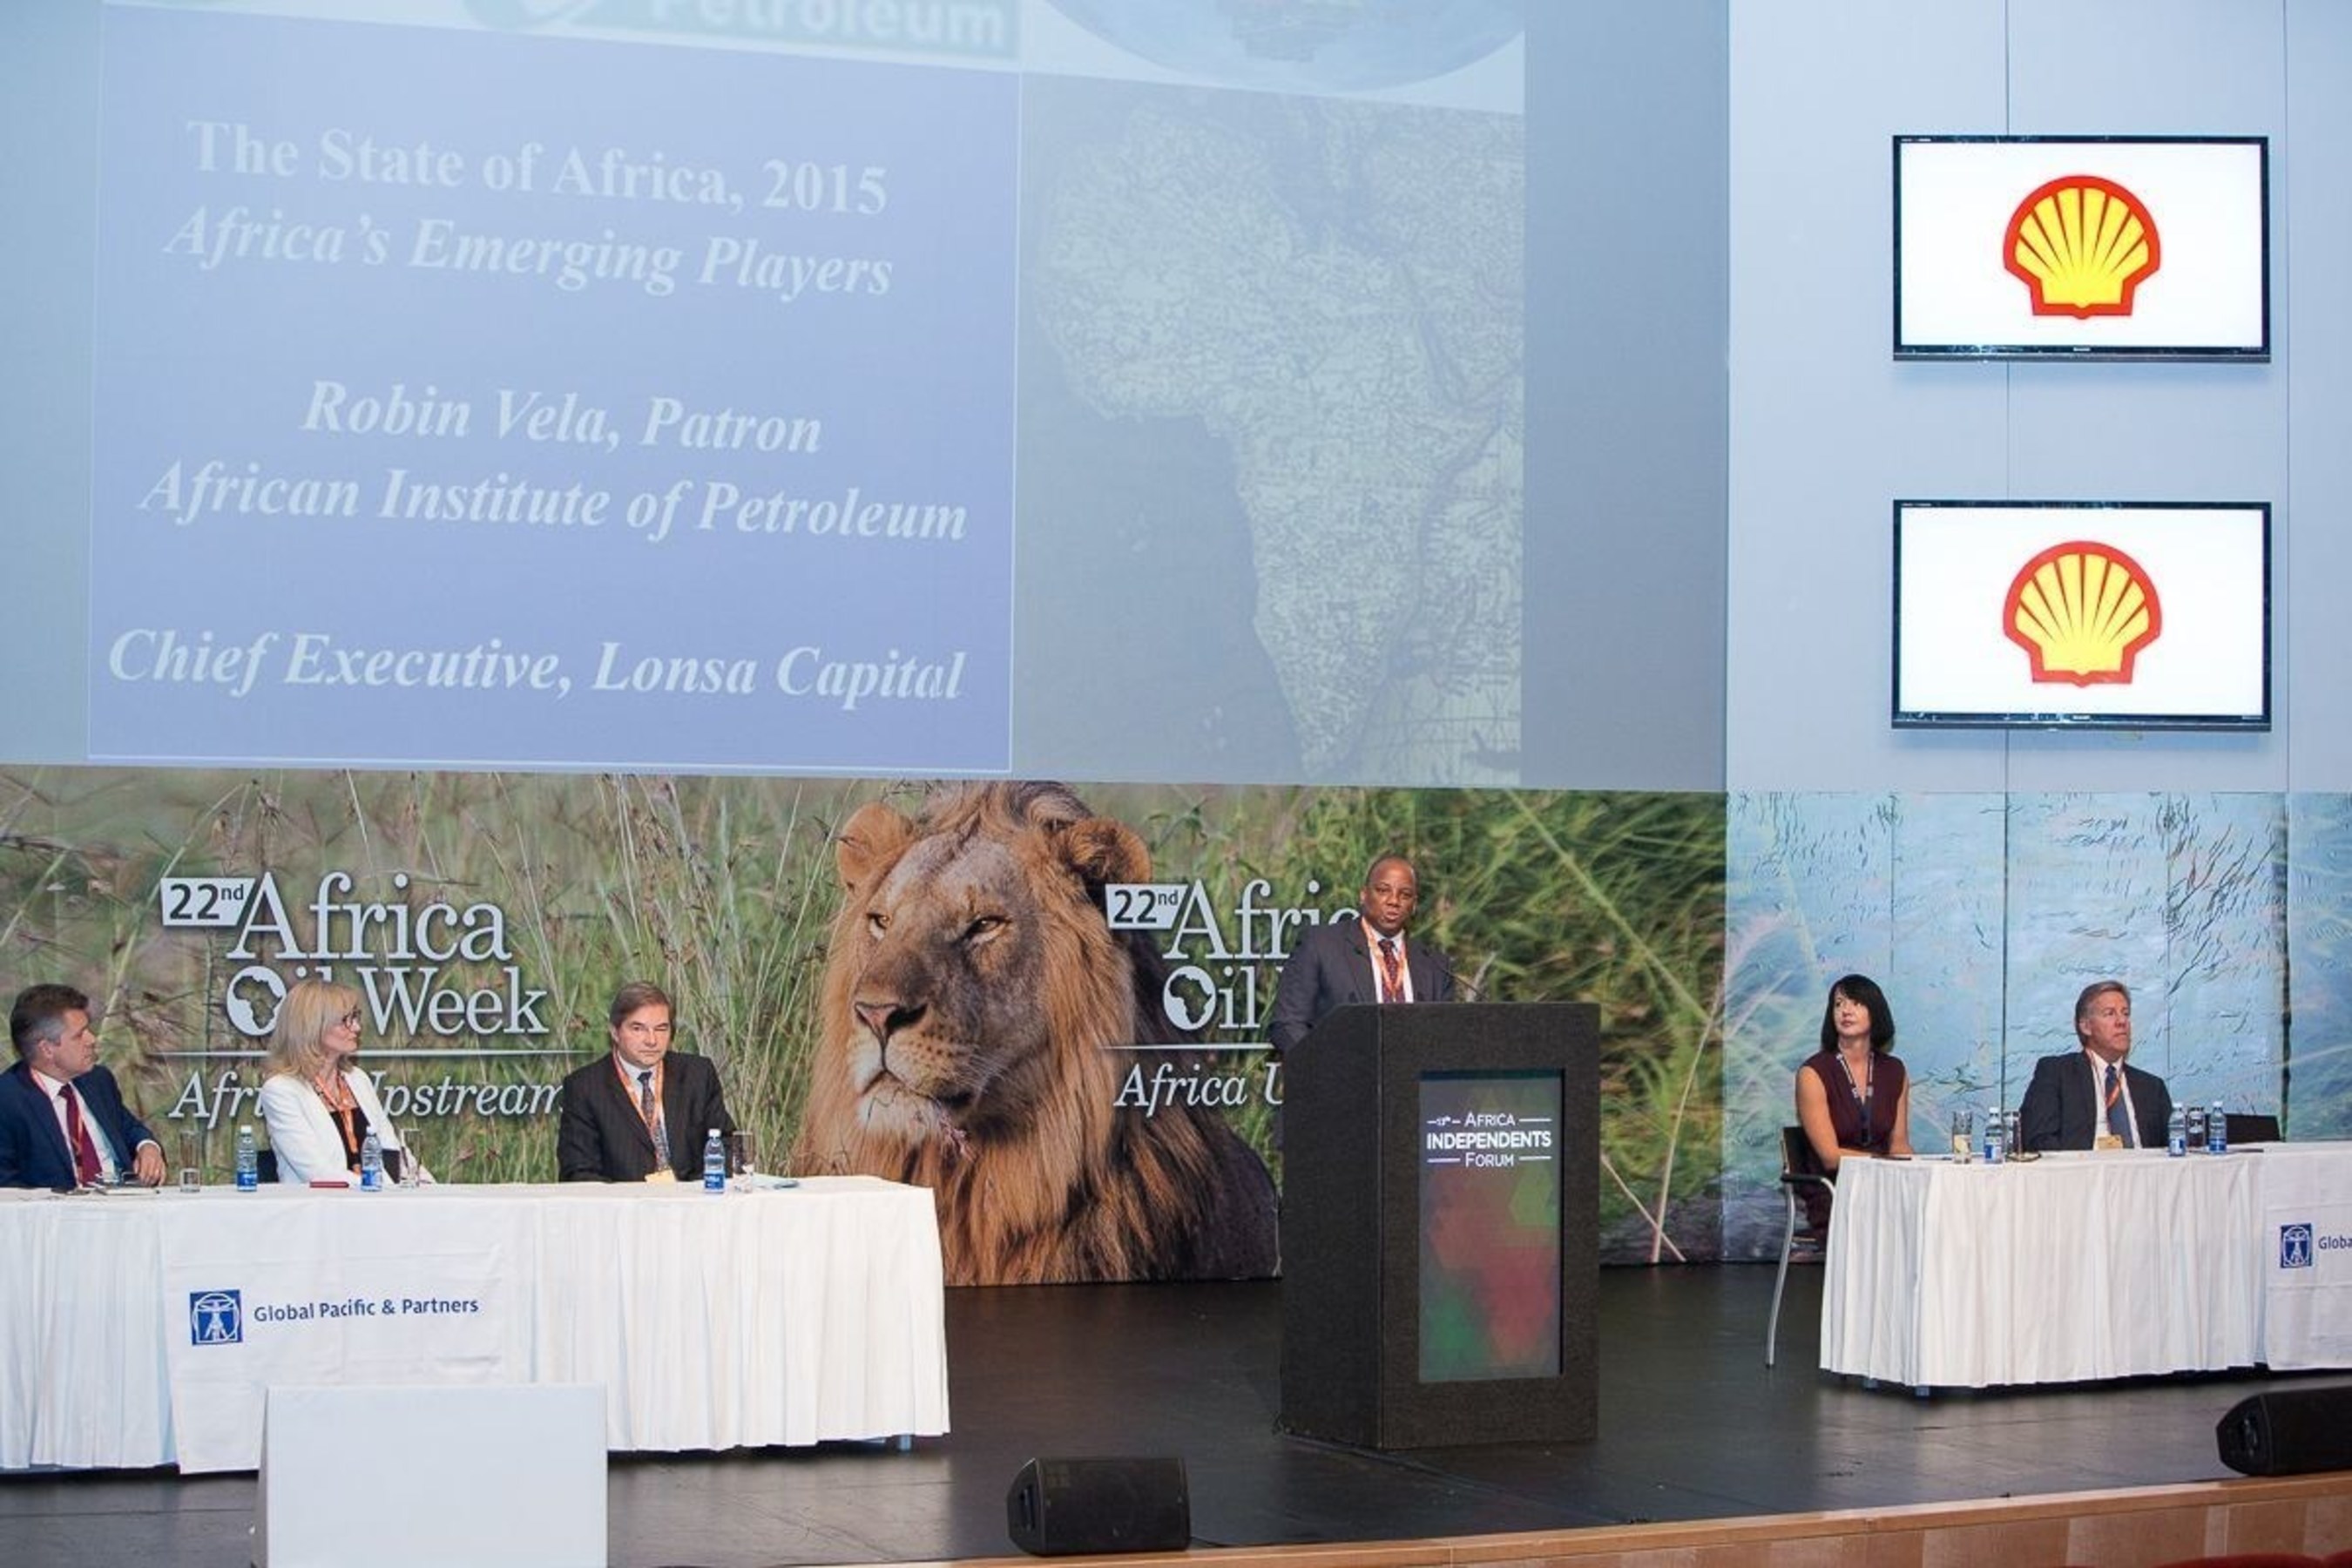 Leading Corporate and State Delegations at Africa Oil Week in Cape Town (PRNewsFoto/Global Pacific & Partners)